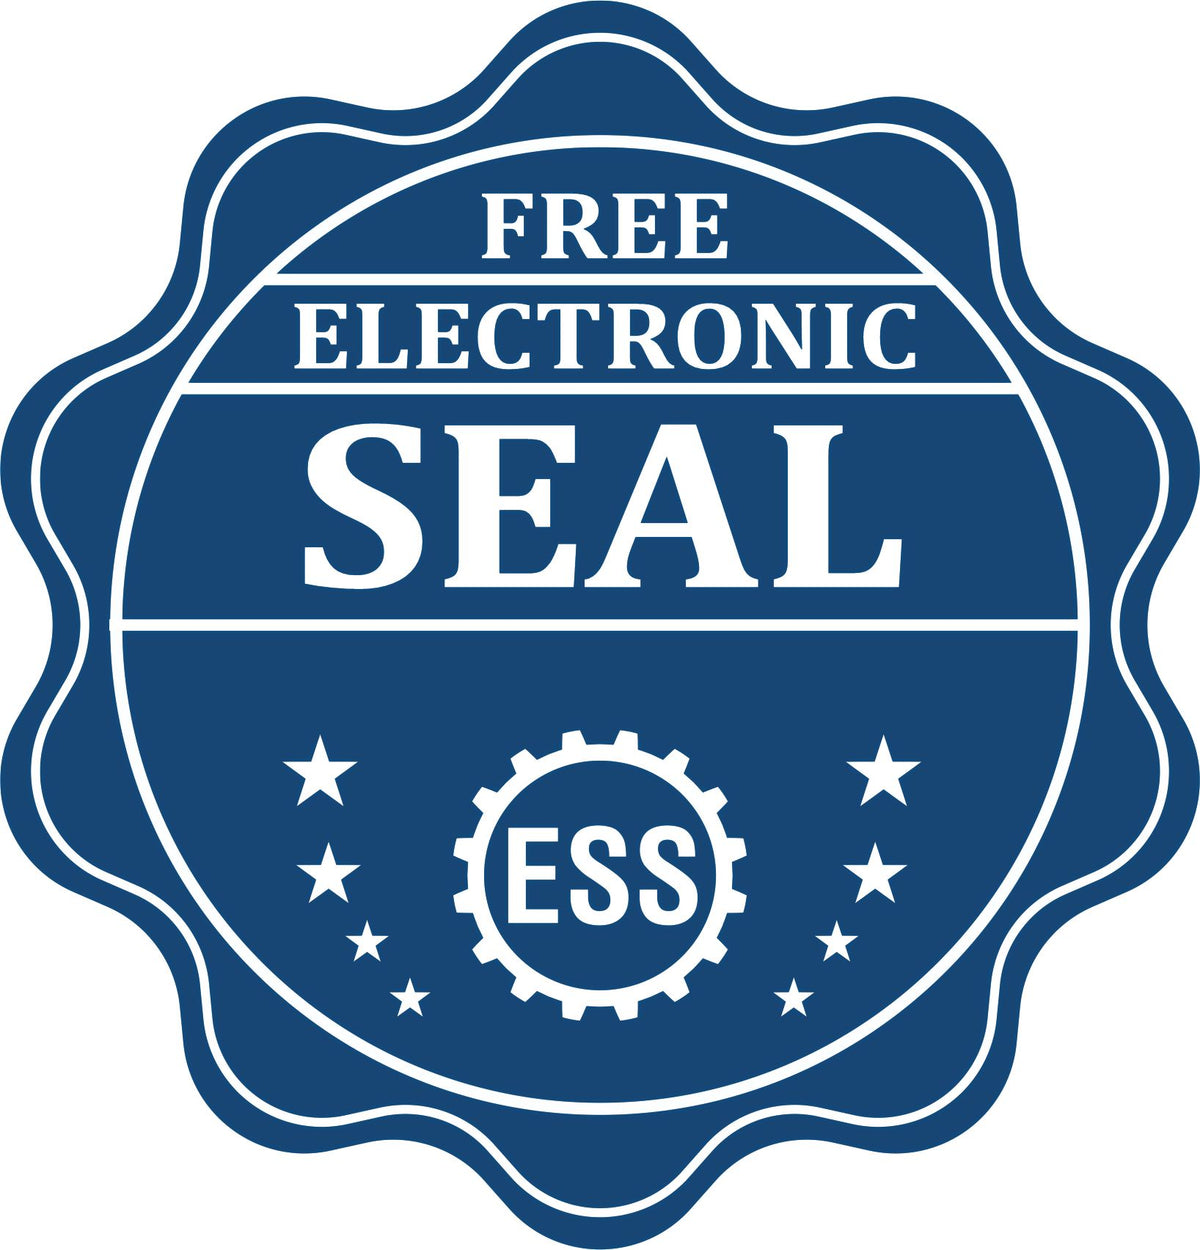 A badge showing a free electronic seal for the Gift Virginia Geologist Seal with stars and the ESS gear on the emblem.